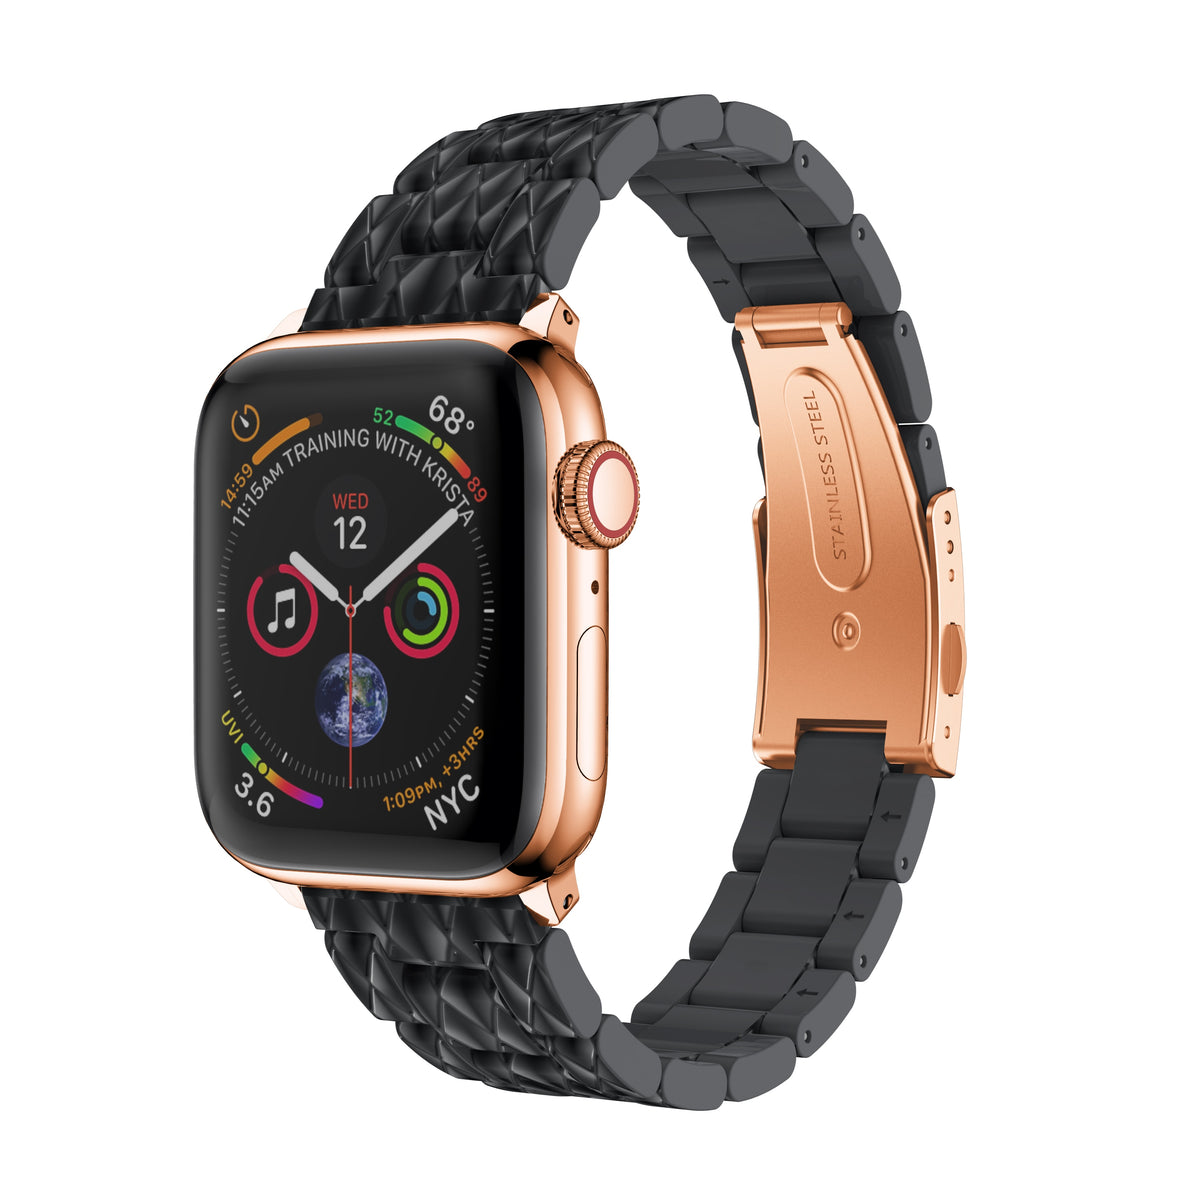 Resin Watchband Strap For Apple Watch Band